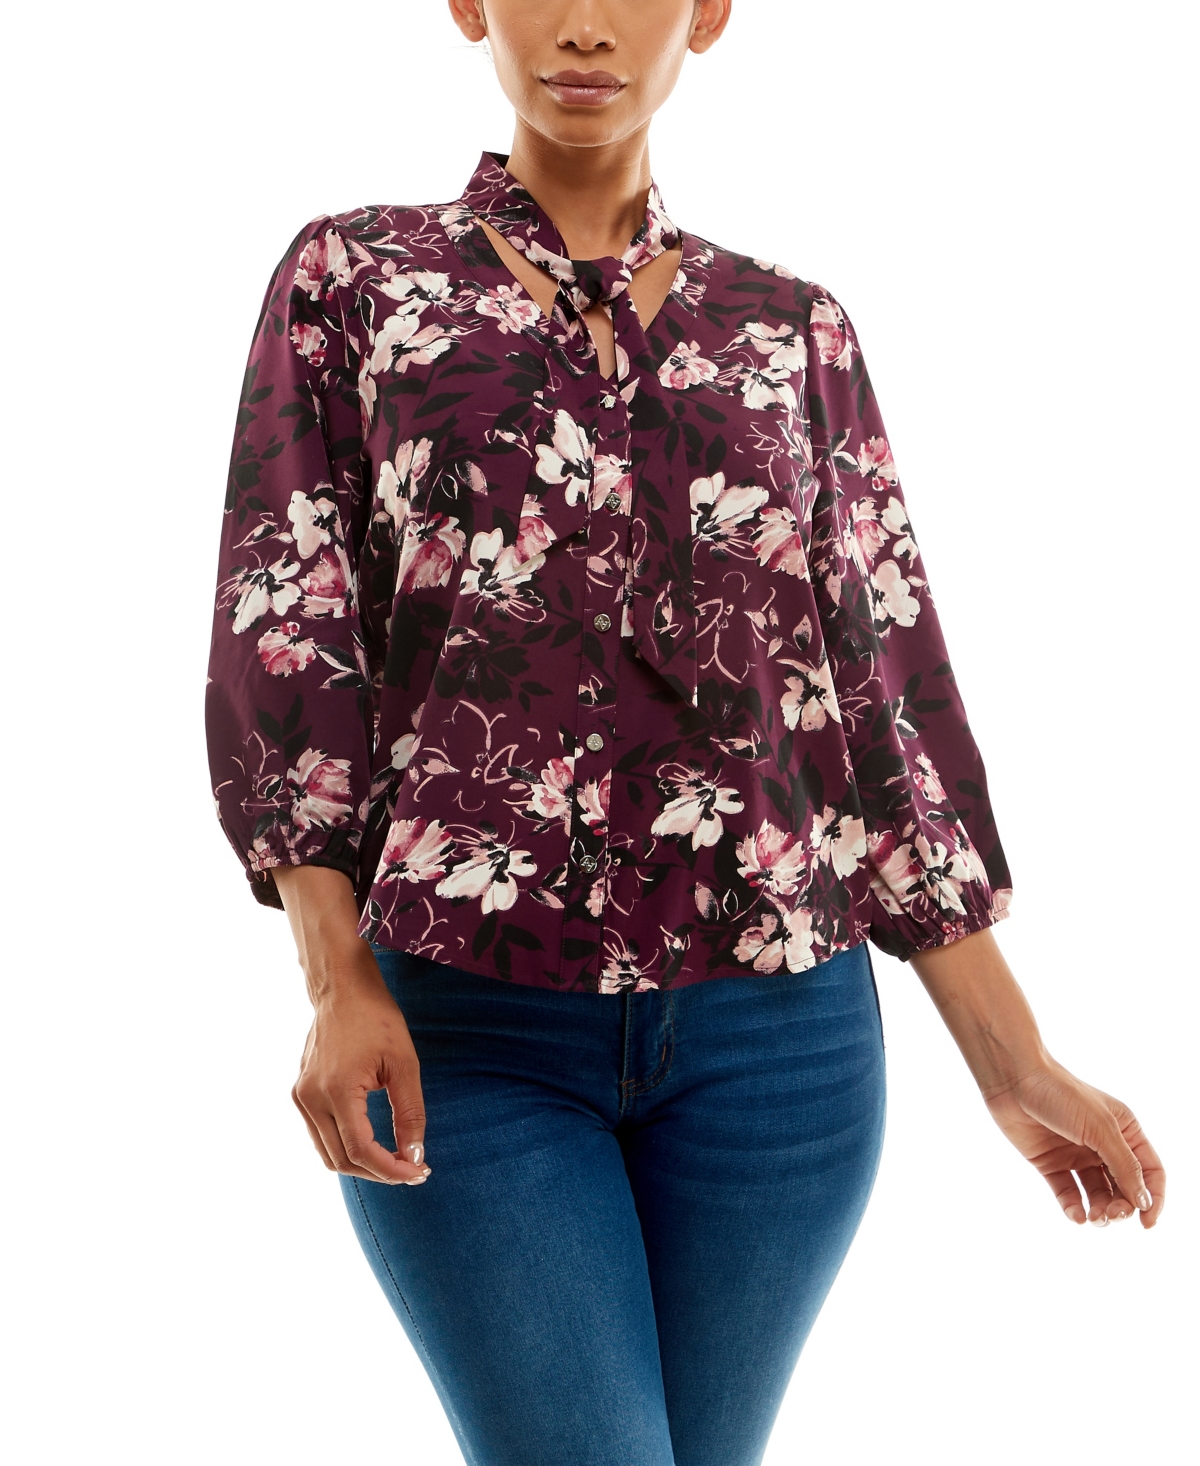 Adrienne Vittadini Women's 3/4 Puff Sleeve Tie Neck Faux Button Front Top In Watercolor Flower